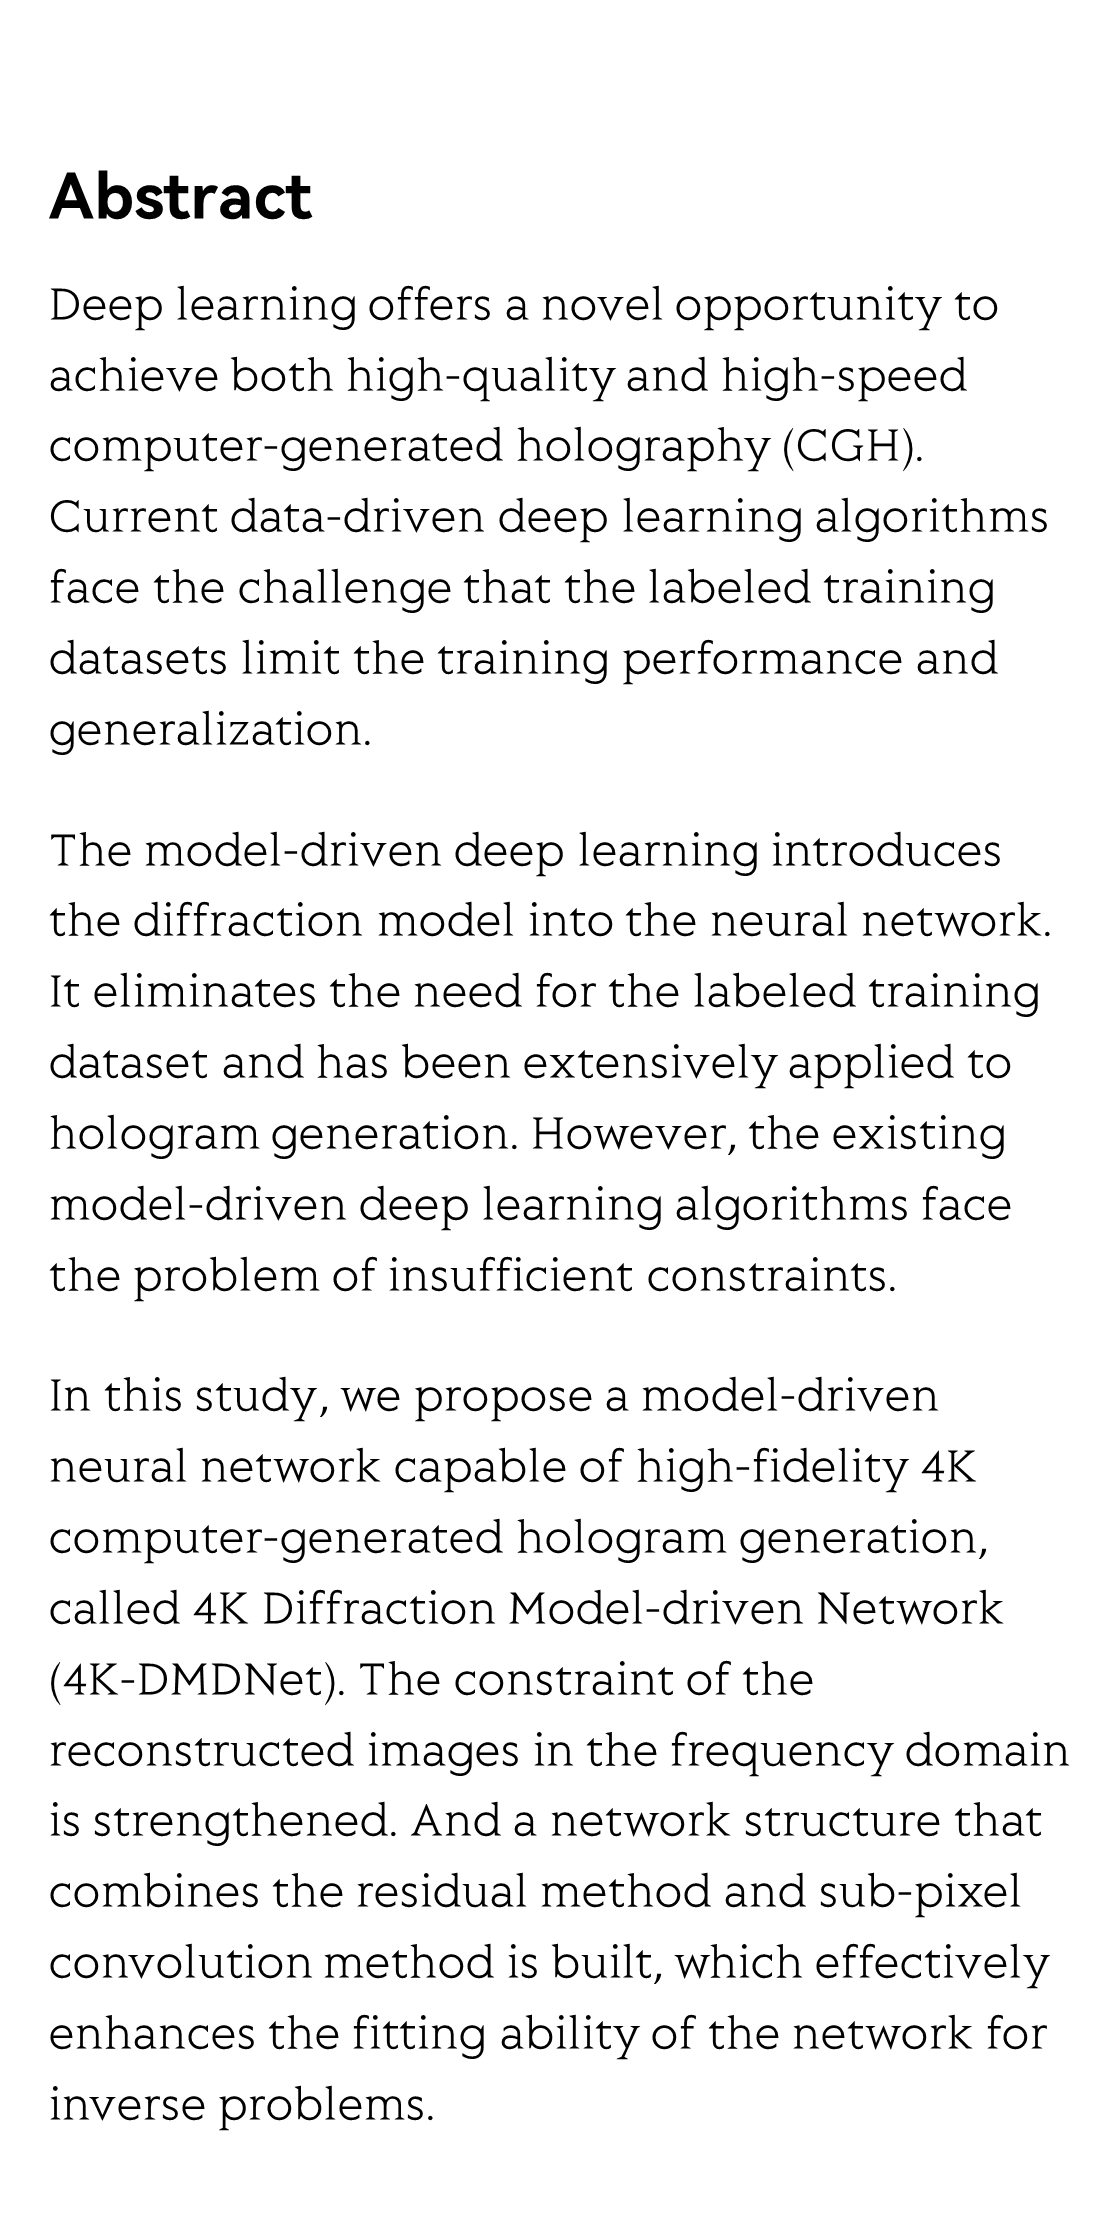 4K-DMDNet: diffraction model-driven network for 4K computer-generated holography_2